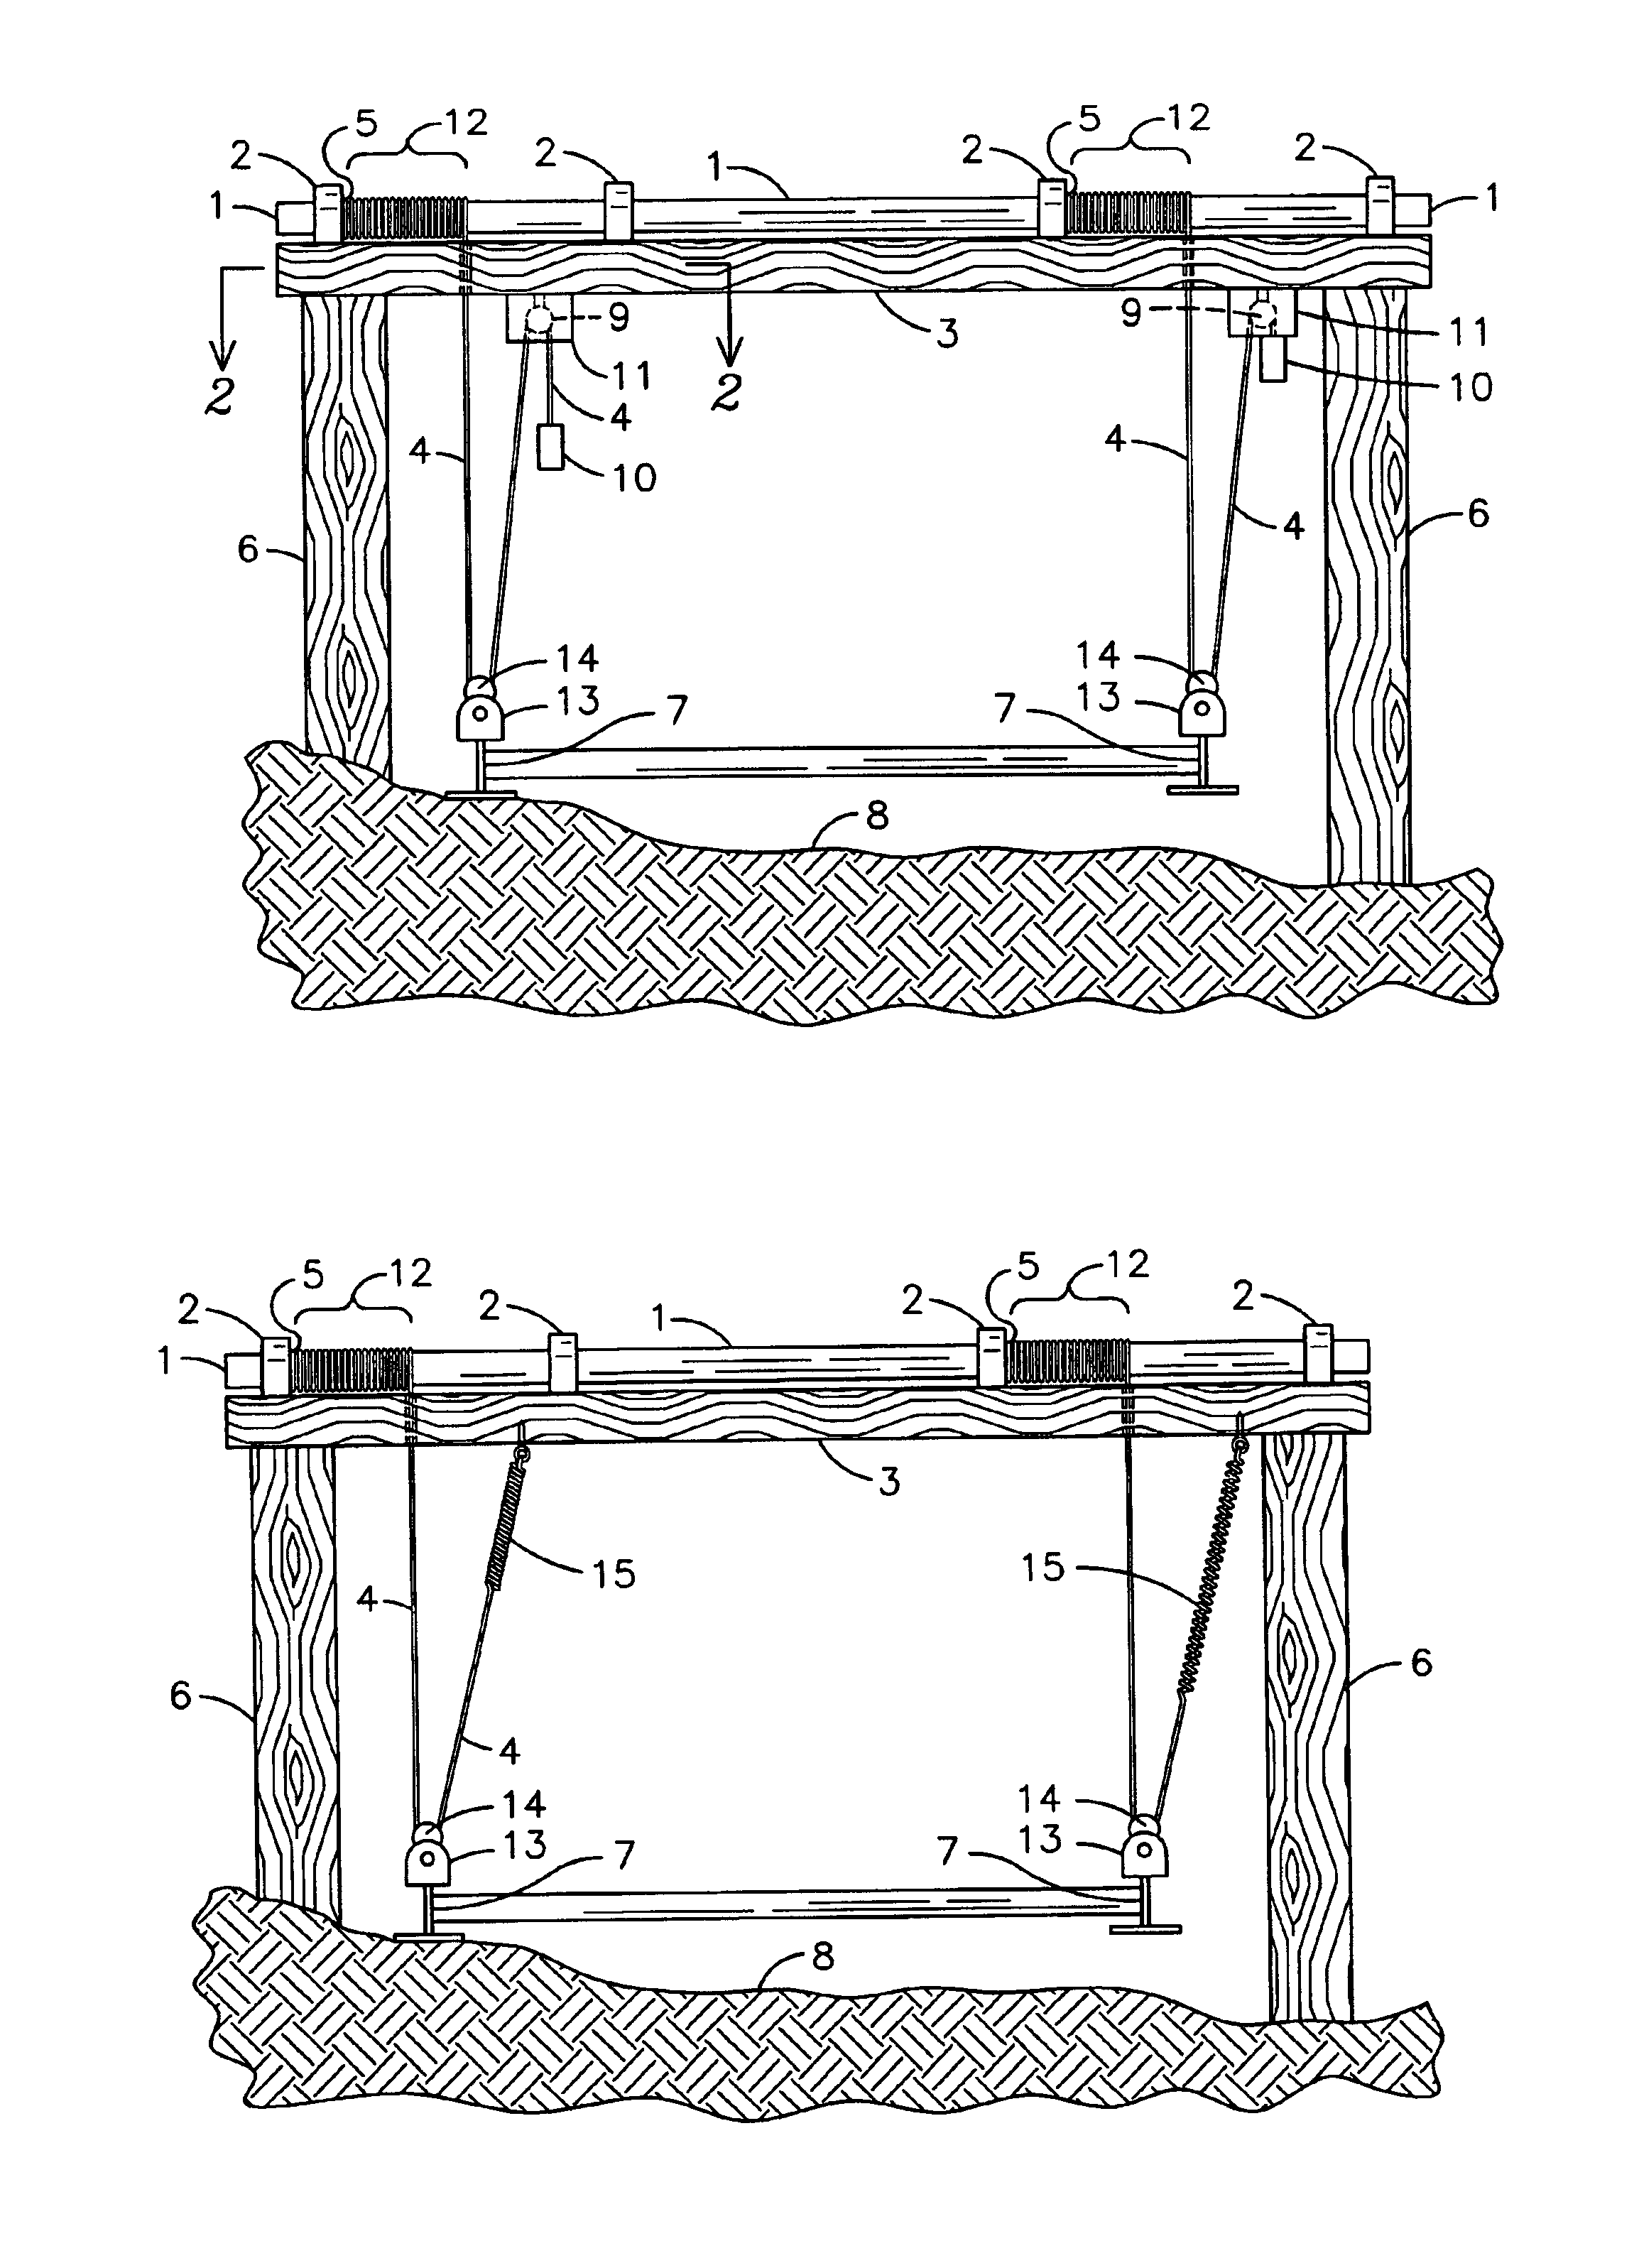 Device for maintaining tension on lift cables